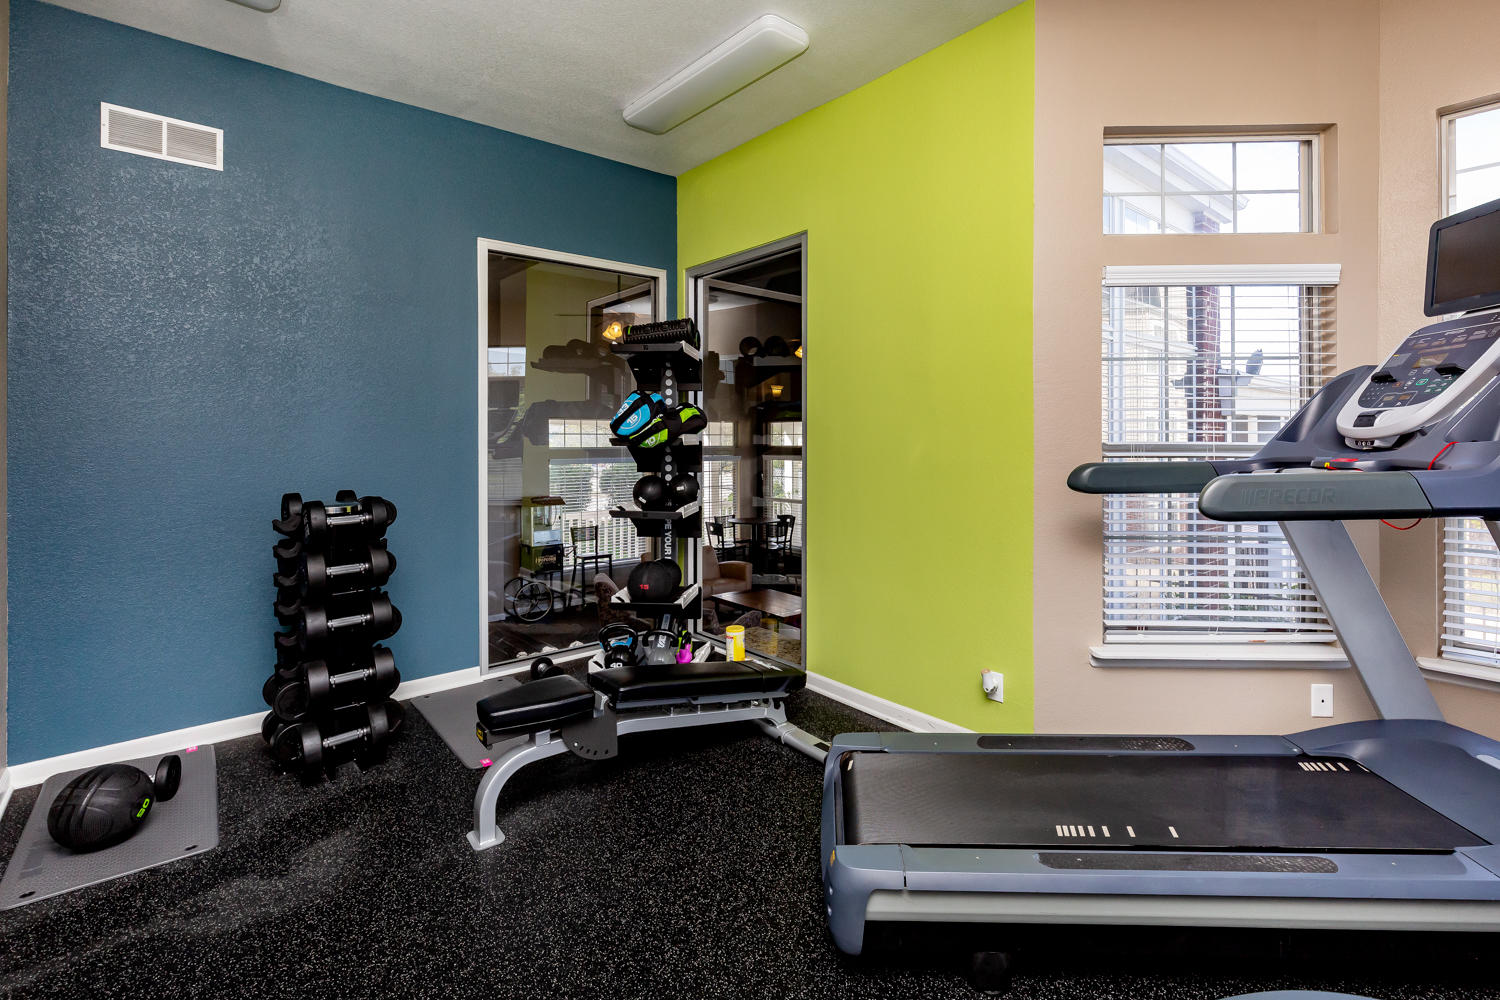 Treadmill and Free Weight Equipment at the Fitness Center